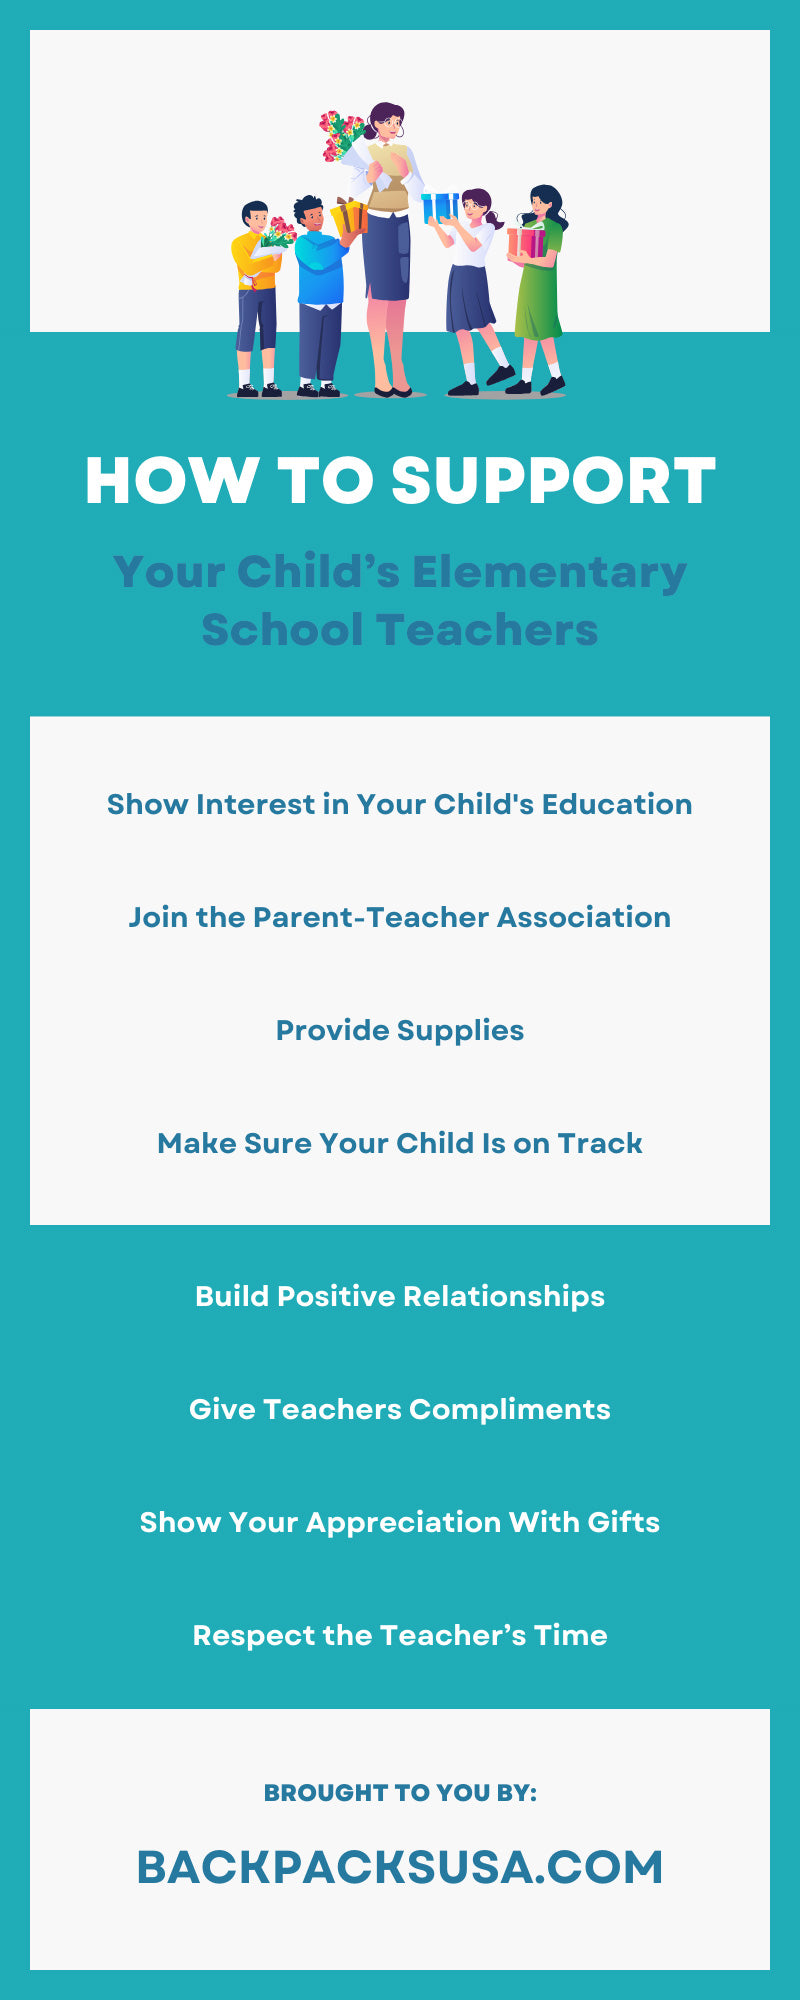 How To Support Your Child’s Elementary School Teachers